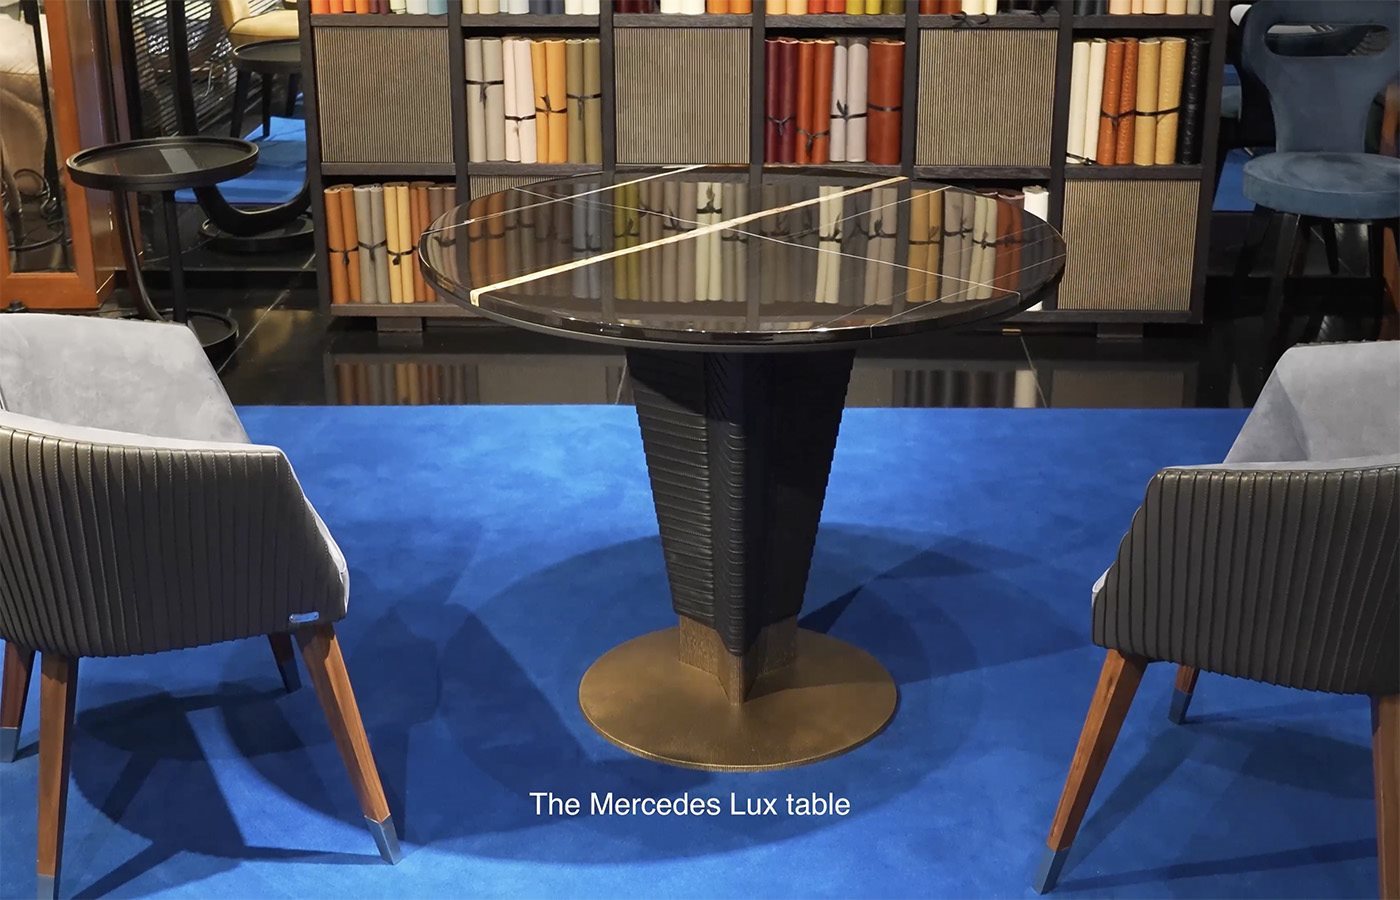 Mercedes_lux_table_video